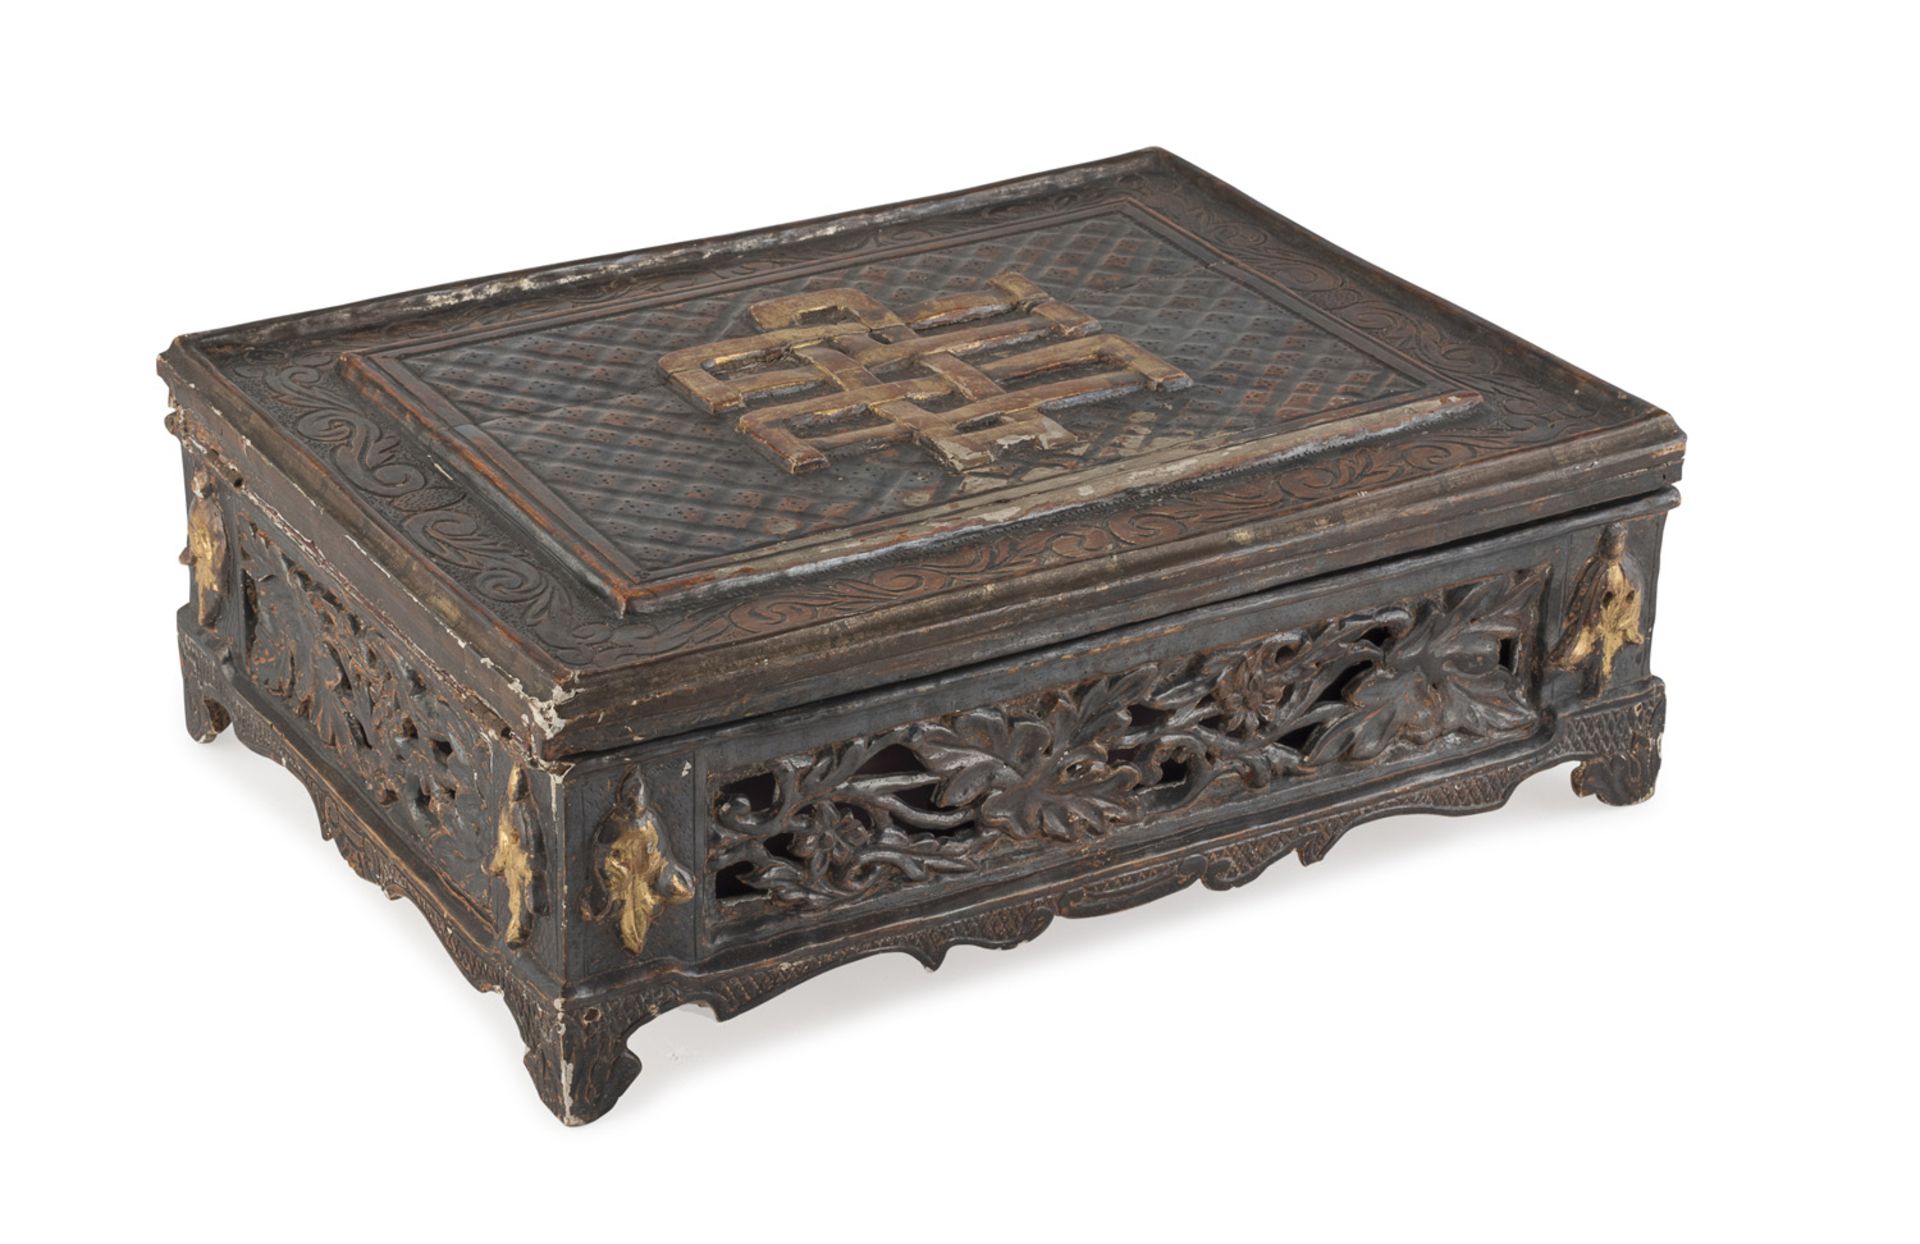 BIG CHINOISERIE WOOD BOX PROBABLY FRANCE LATE 18TH CENTURY